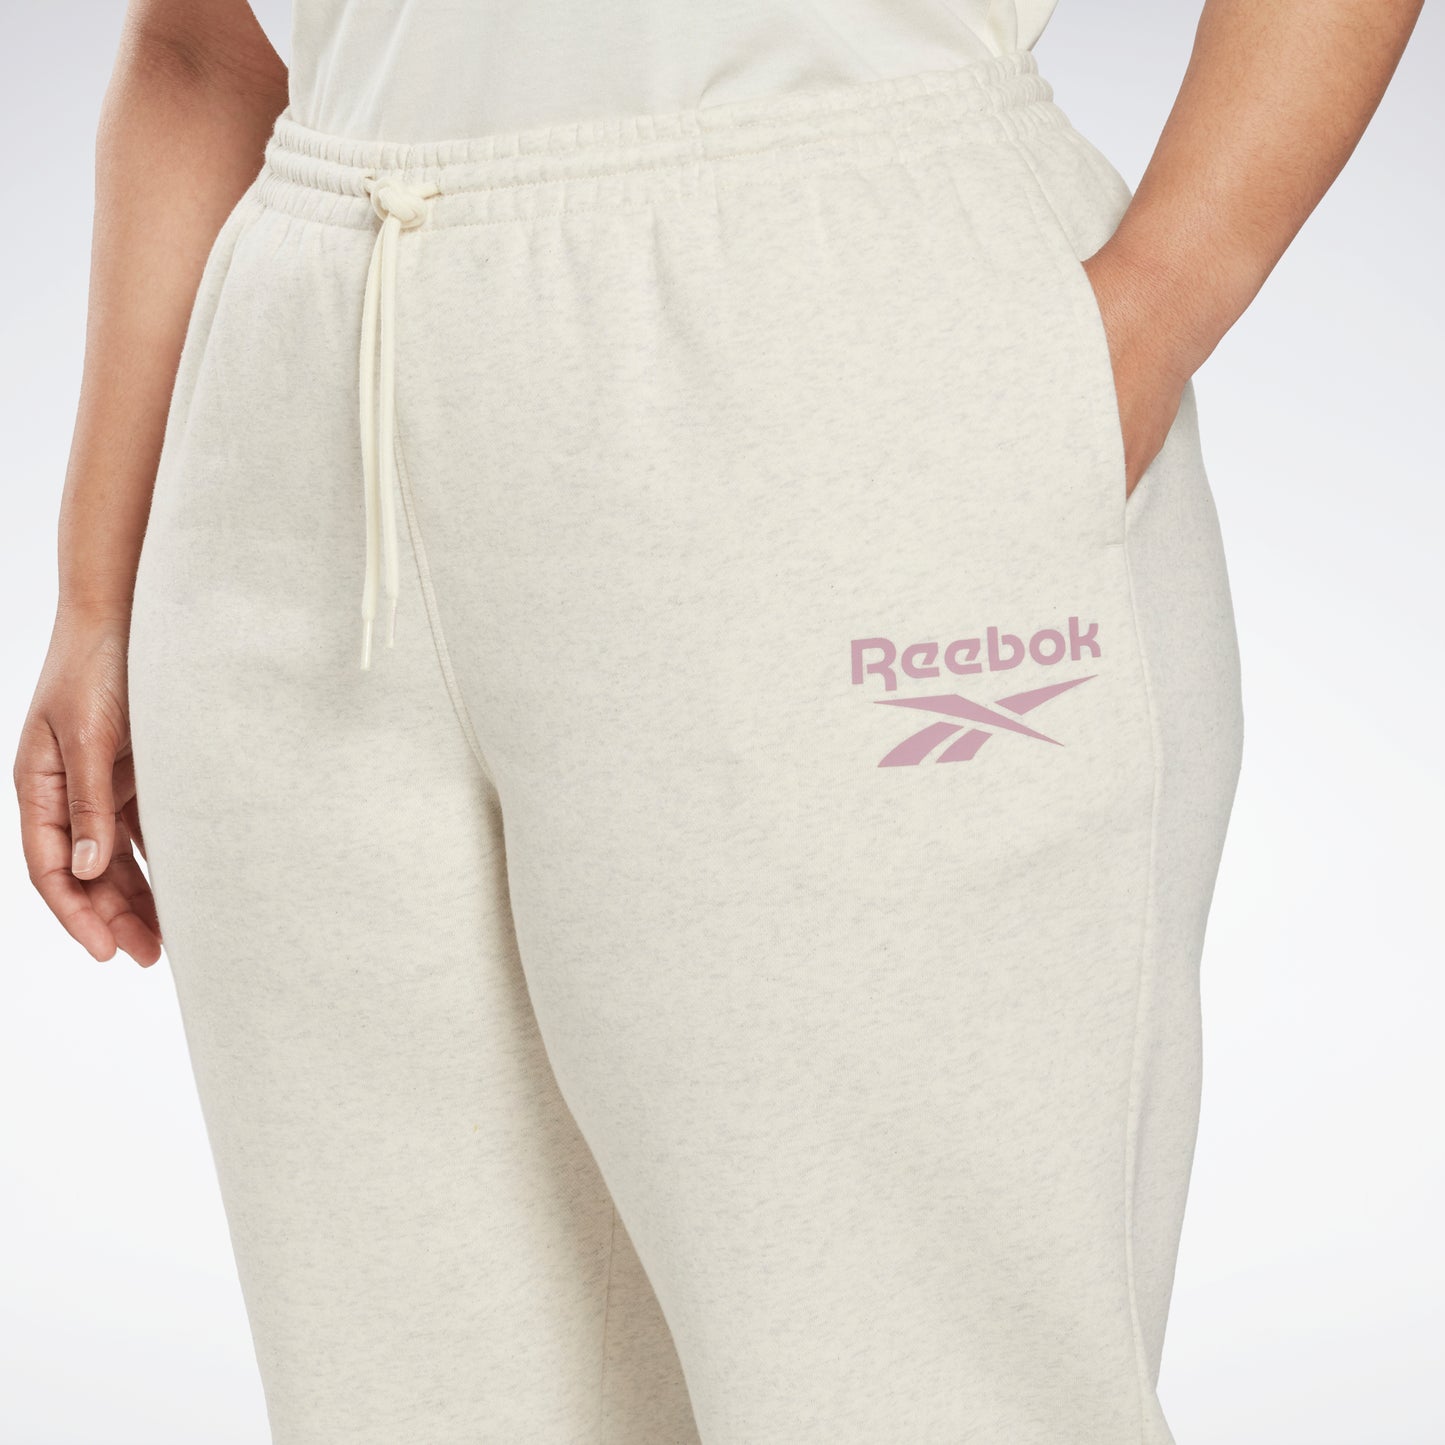 Womens Reebok Cuffed Jogger Pants New with tags size Large